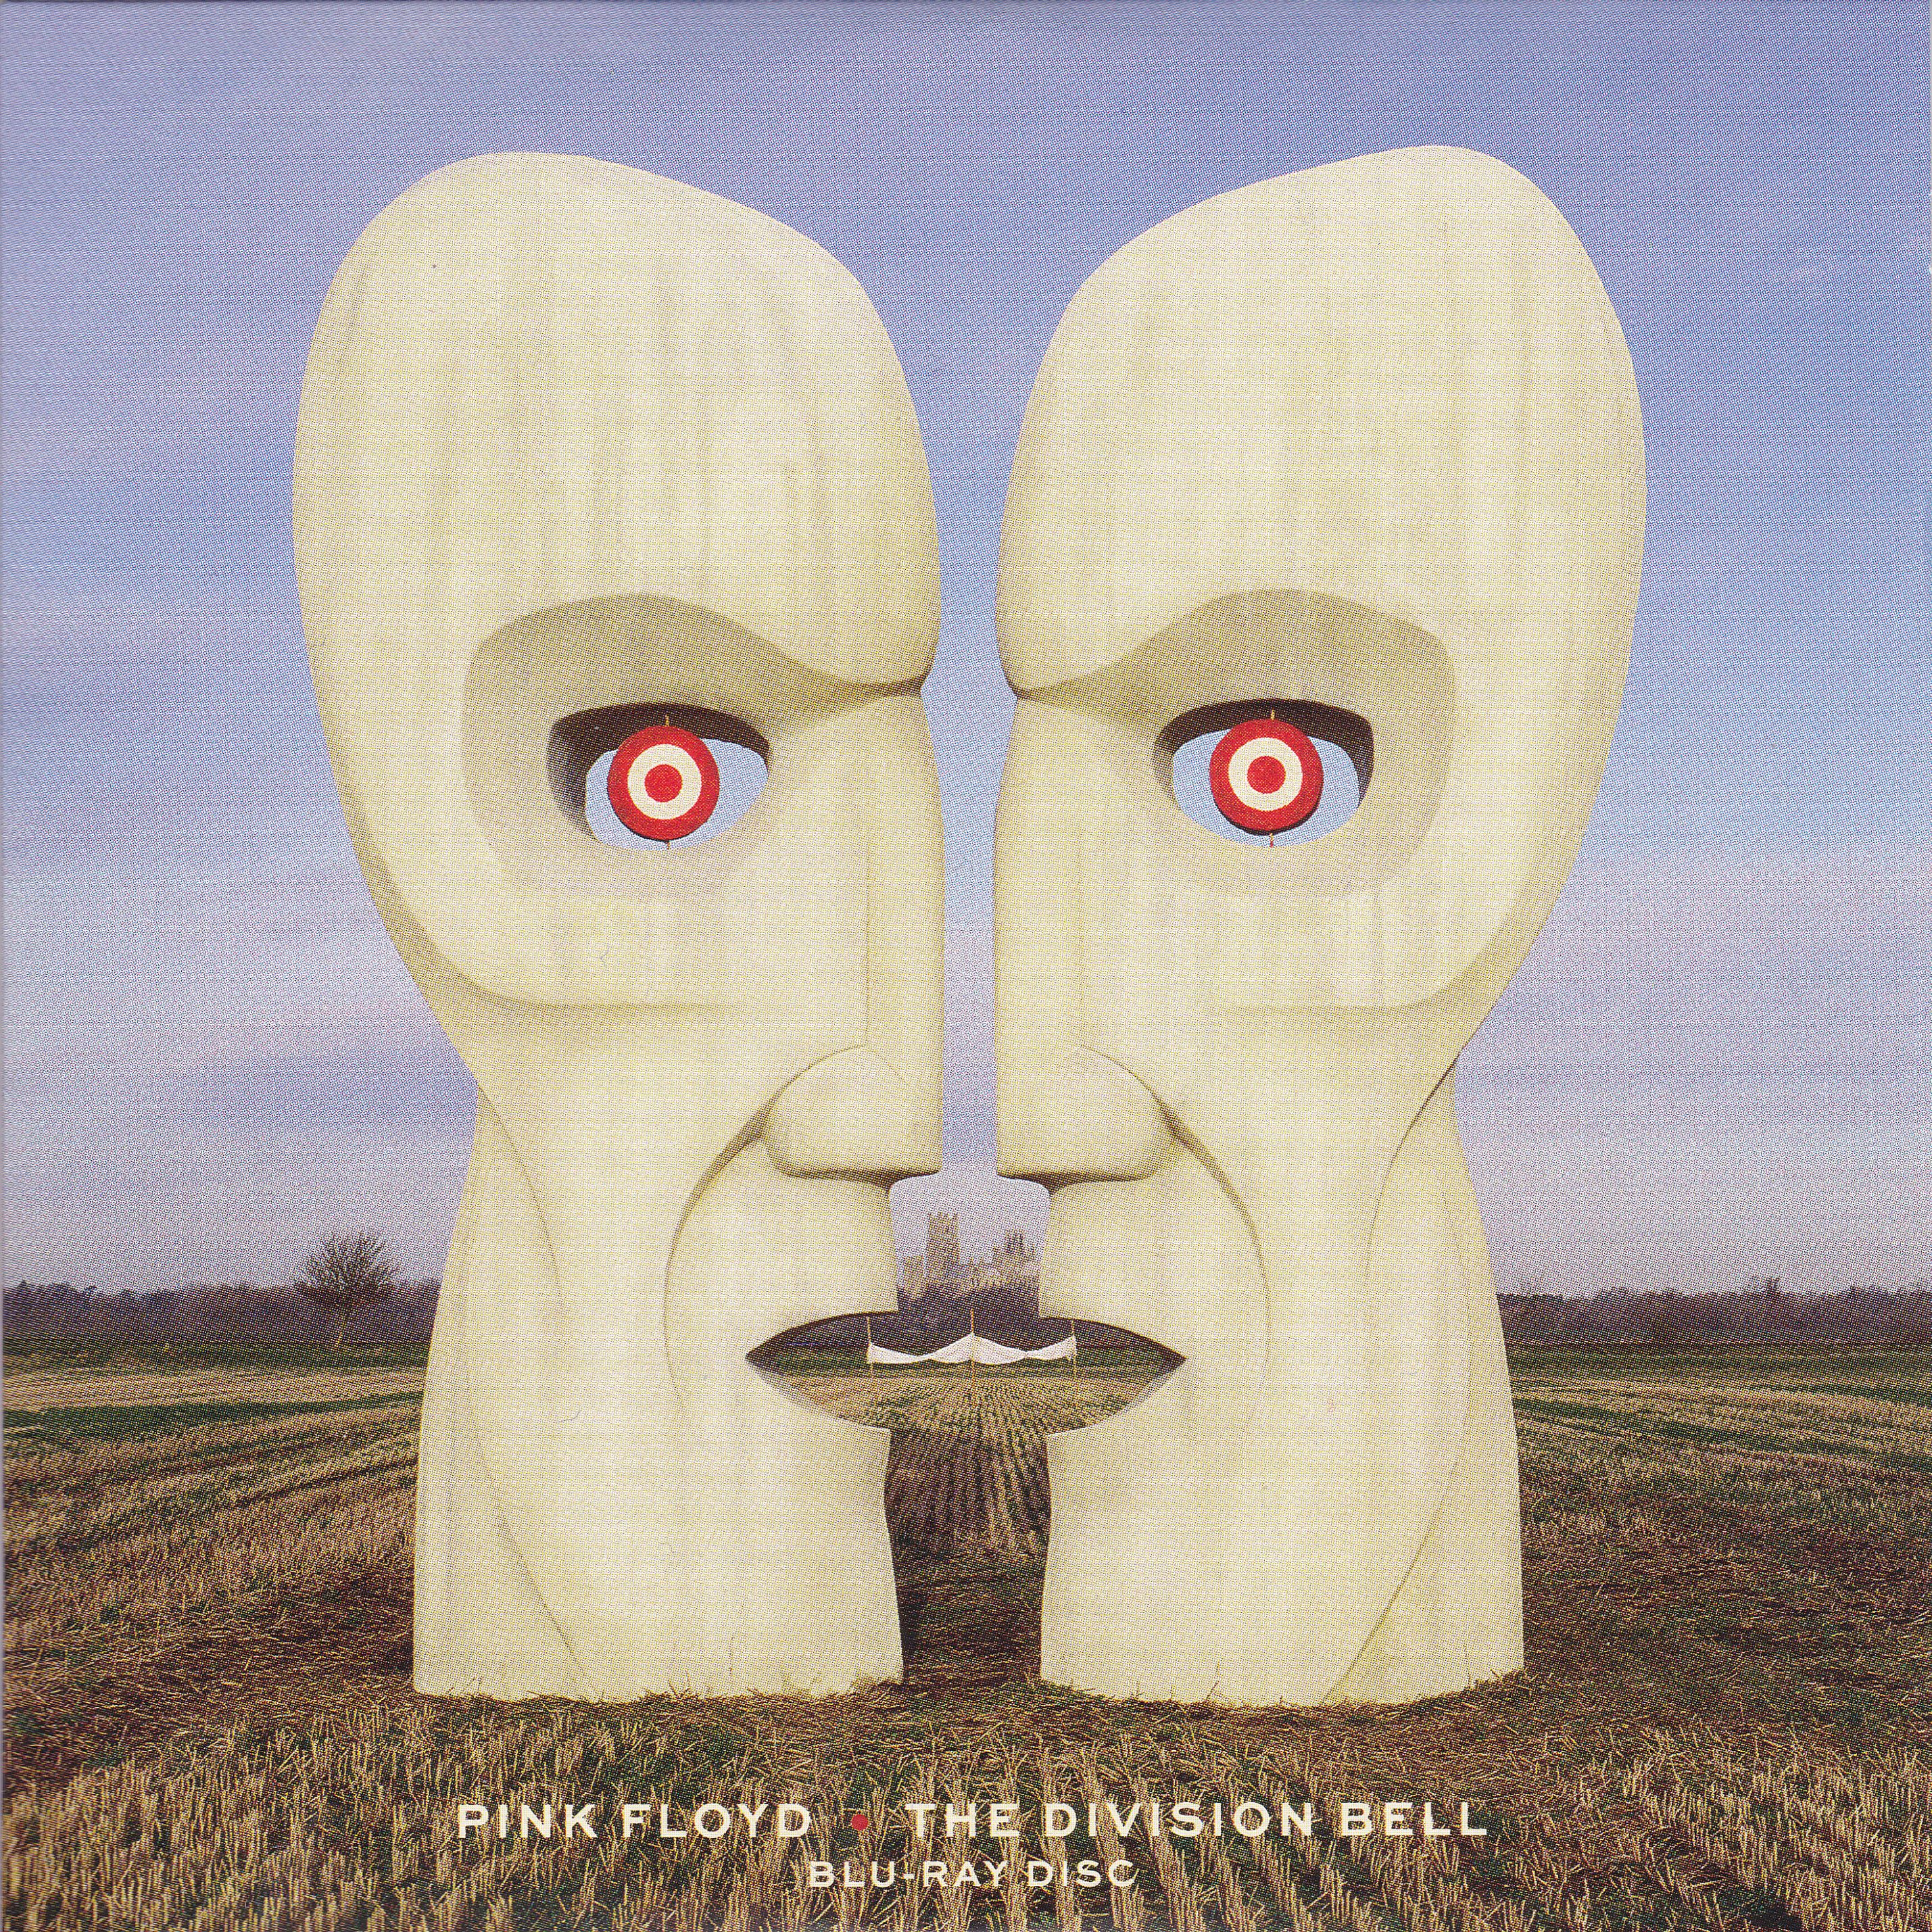 Pink Floyd - 1994 - The Division Bell 20th Anniv Ed [2014 BD] 24-96